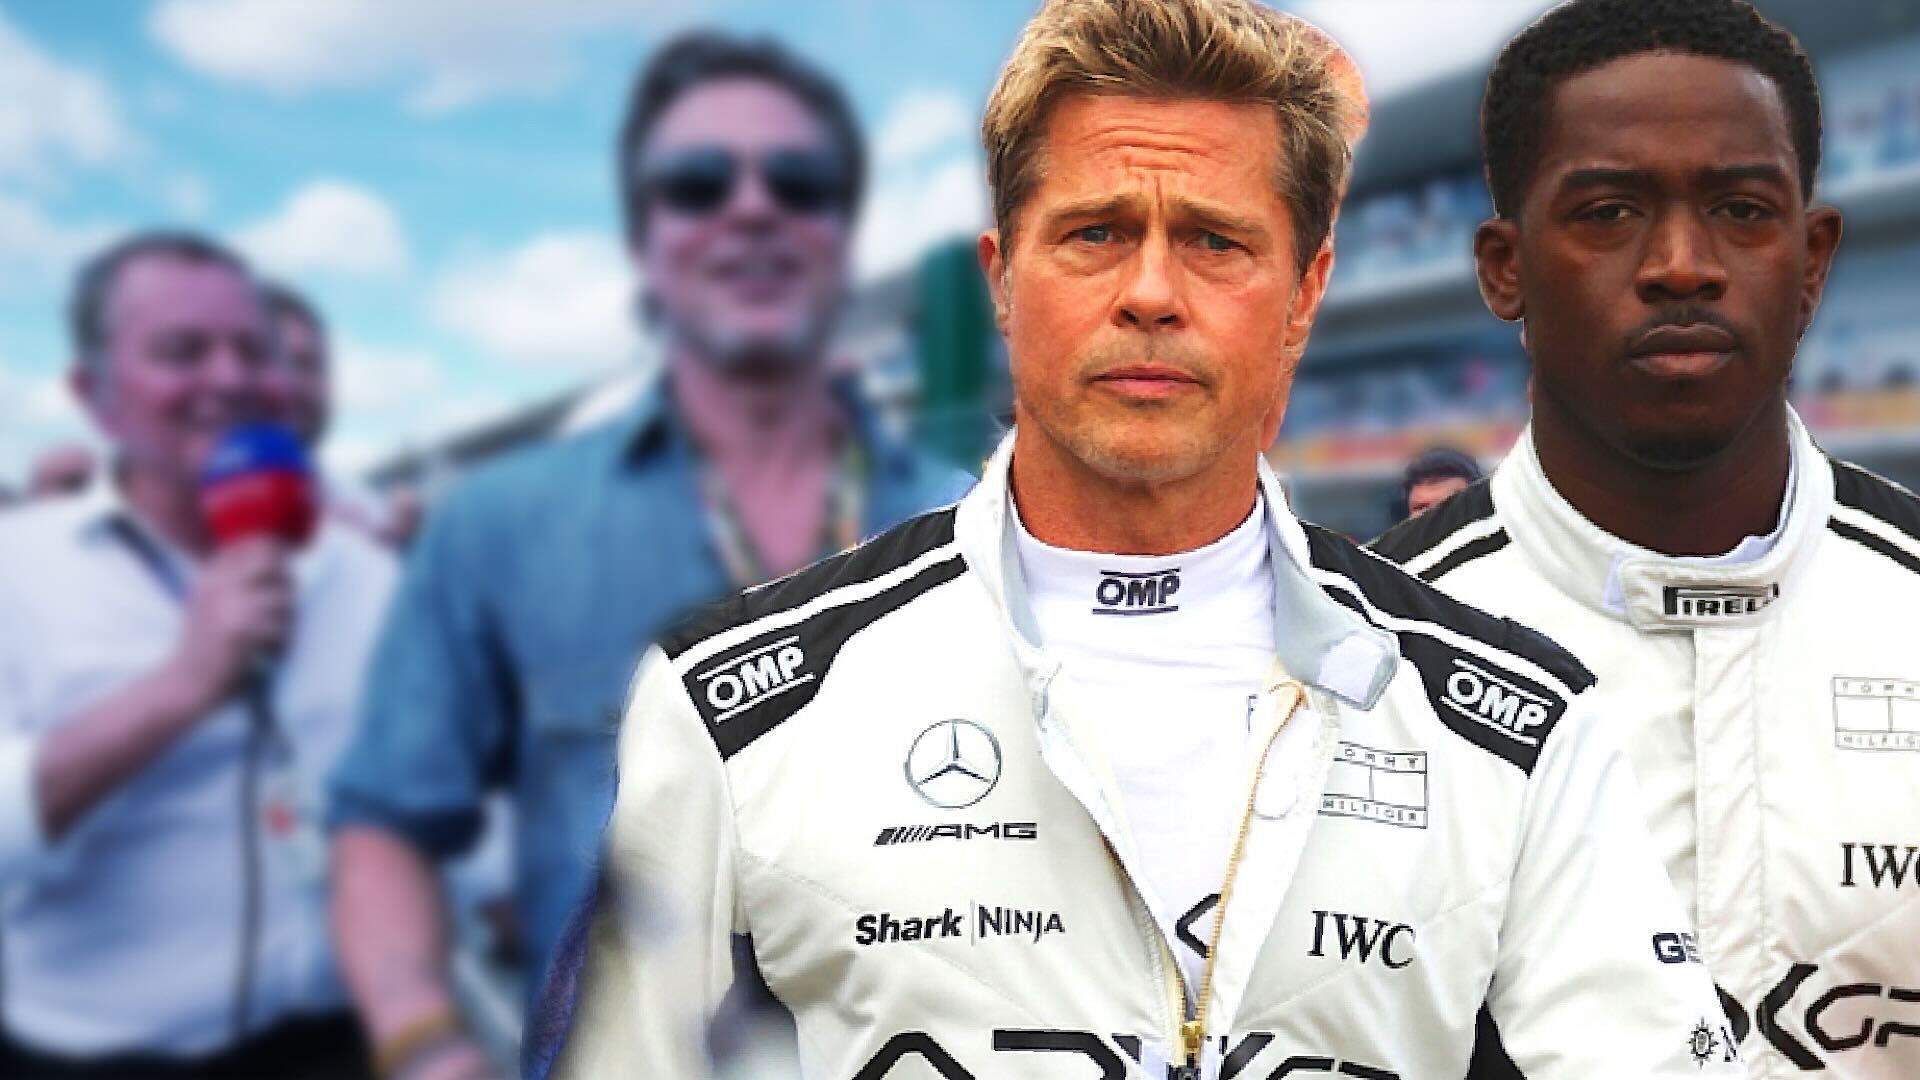 Brad Pitt in Formula One suit with racing circuit interview background